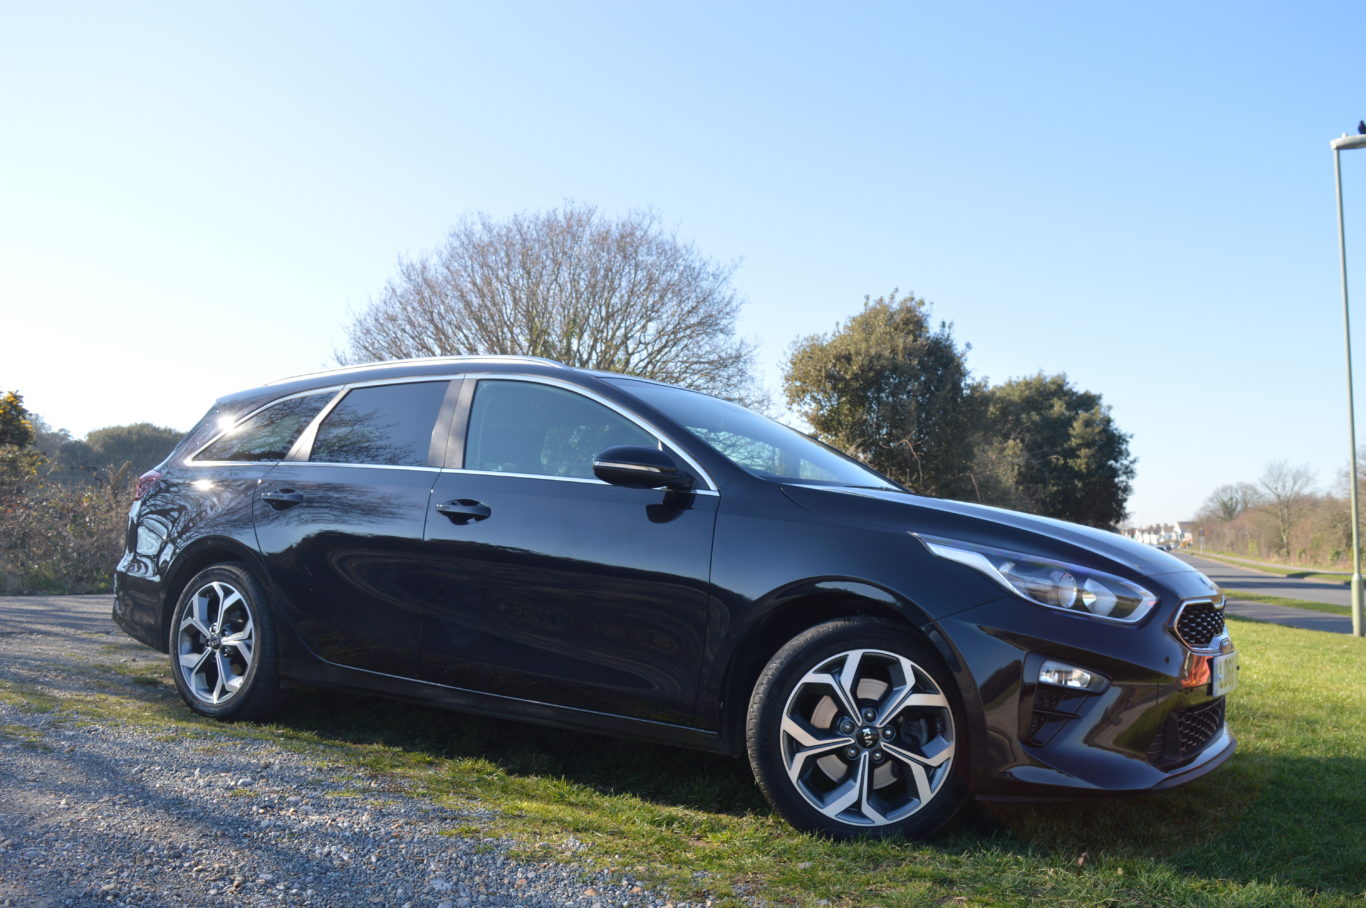 Large alloy wheels help the Kia stand out